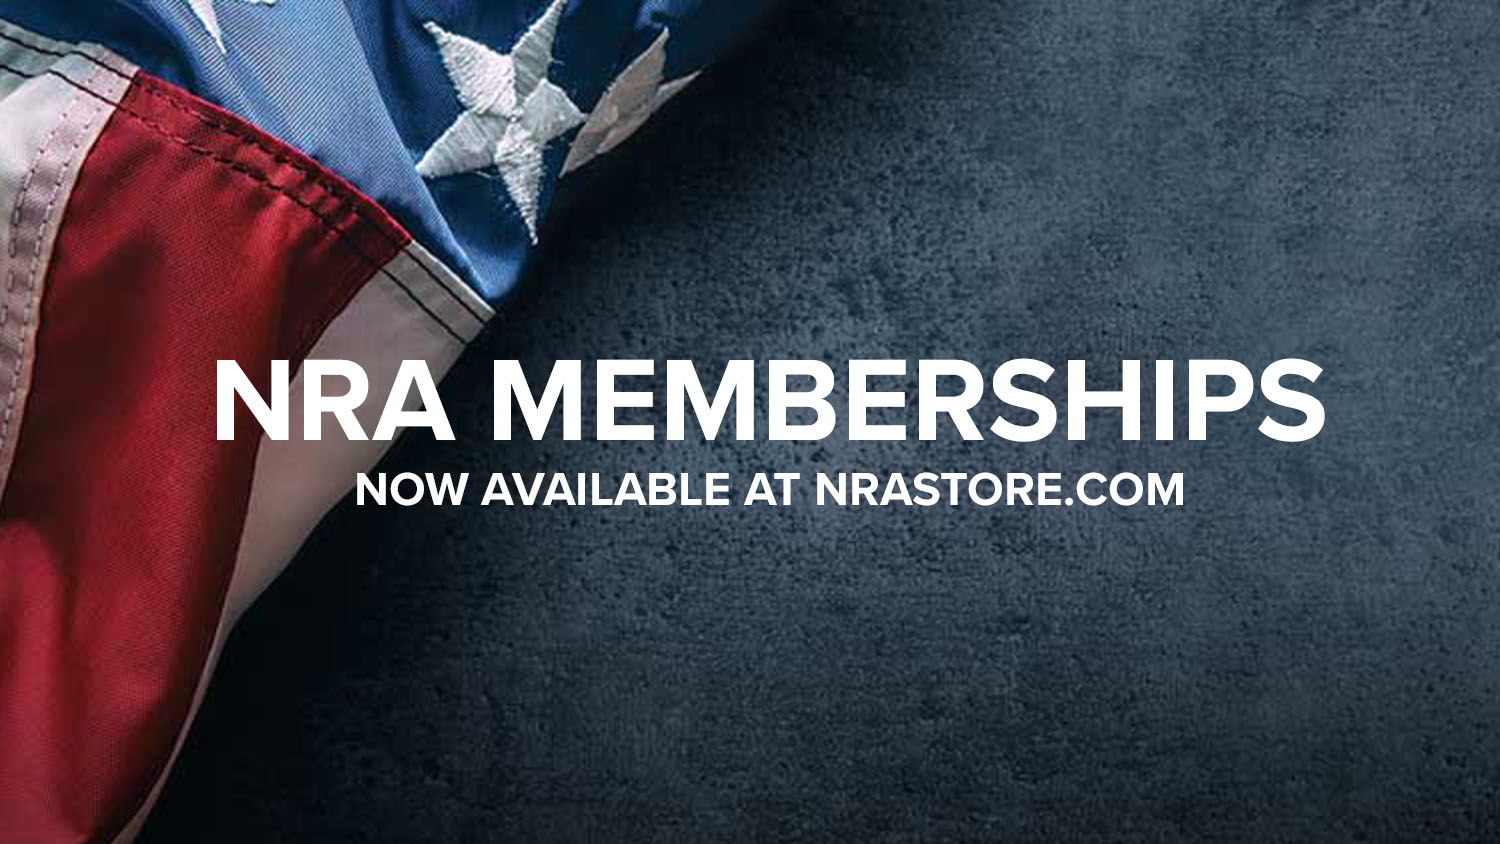 Celebrate Independence Day With A Membership Deal From the NRAstore